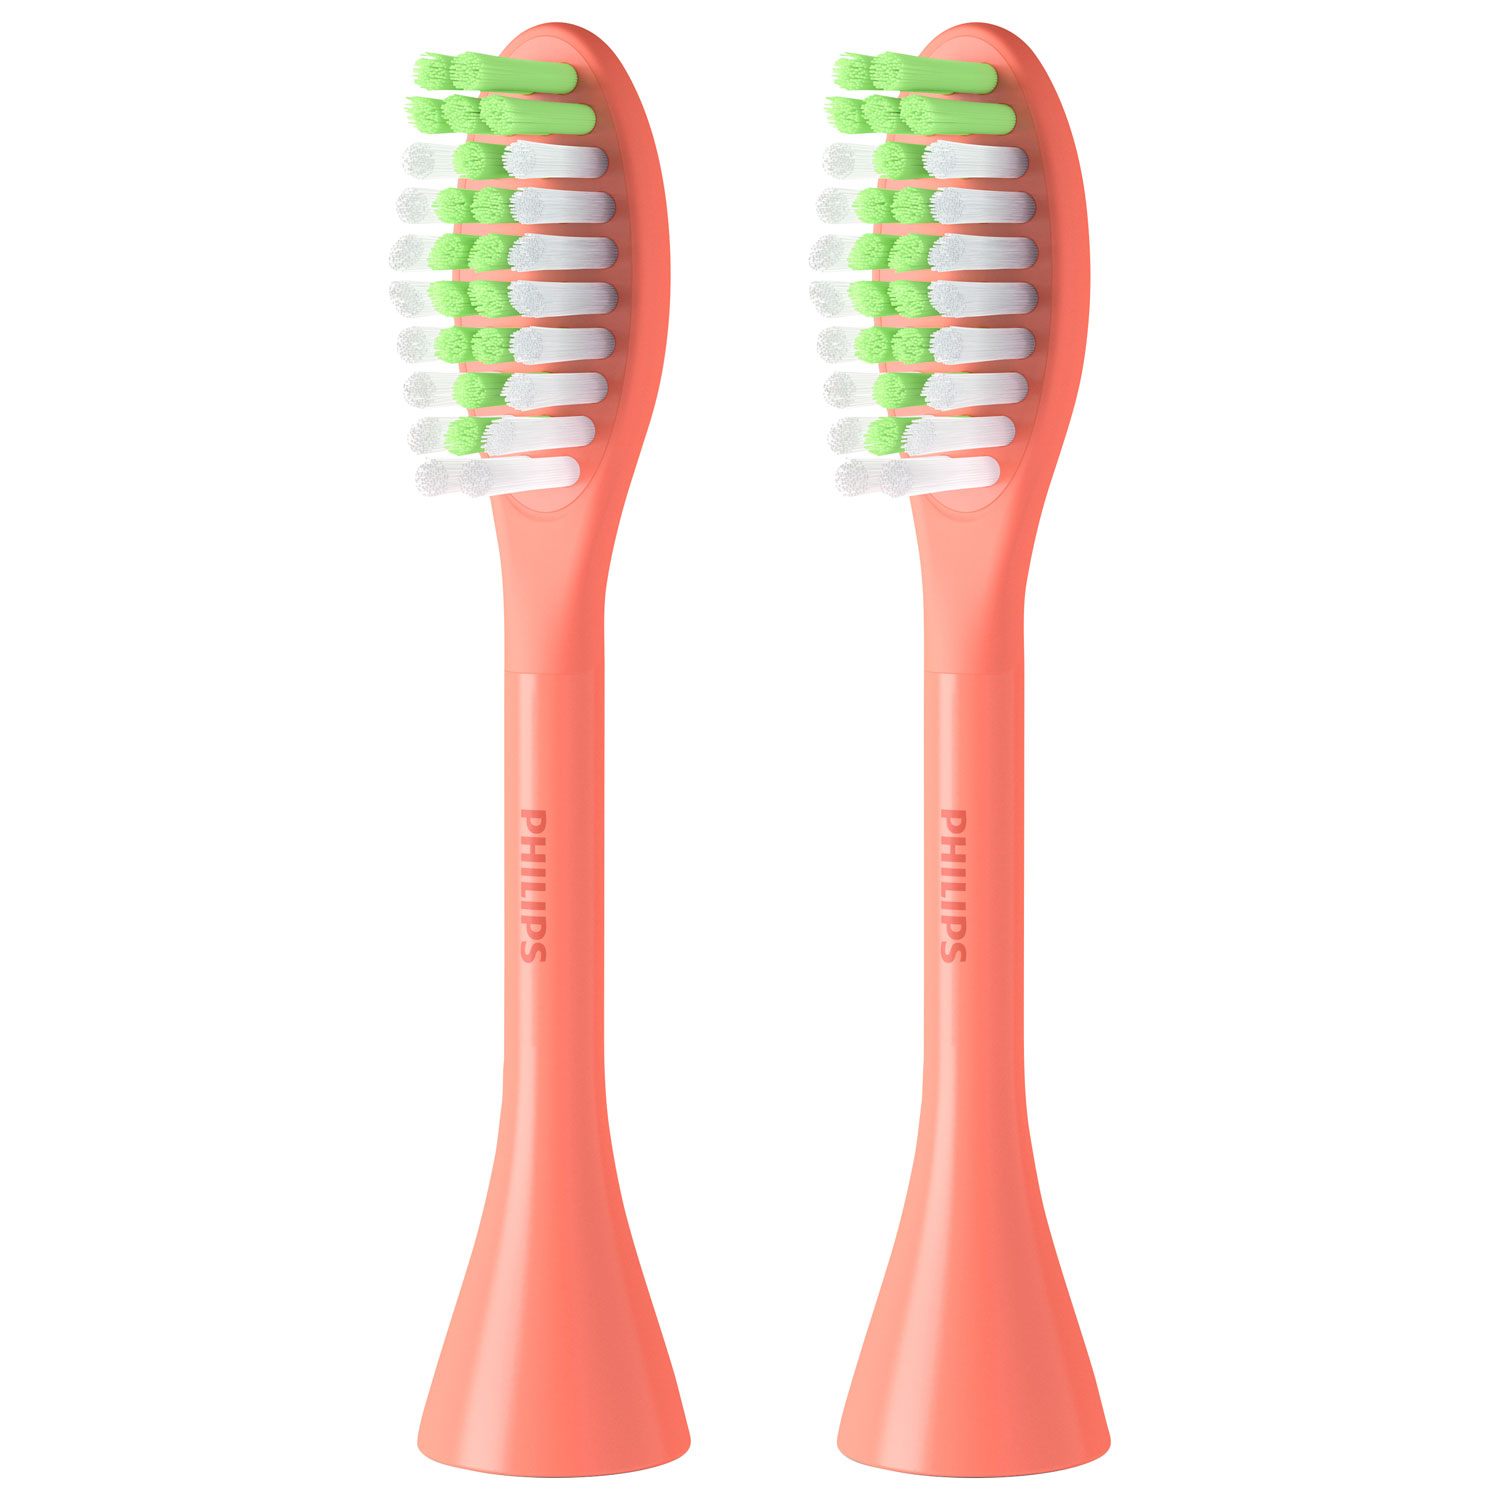 Philips One by Sonicare Replacement Brush Head (BH1022/01) - 2 Pack - Miami Coral